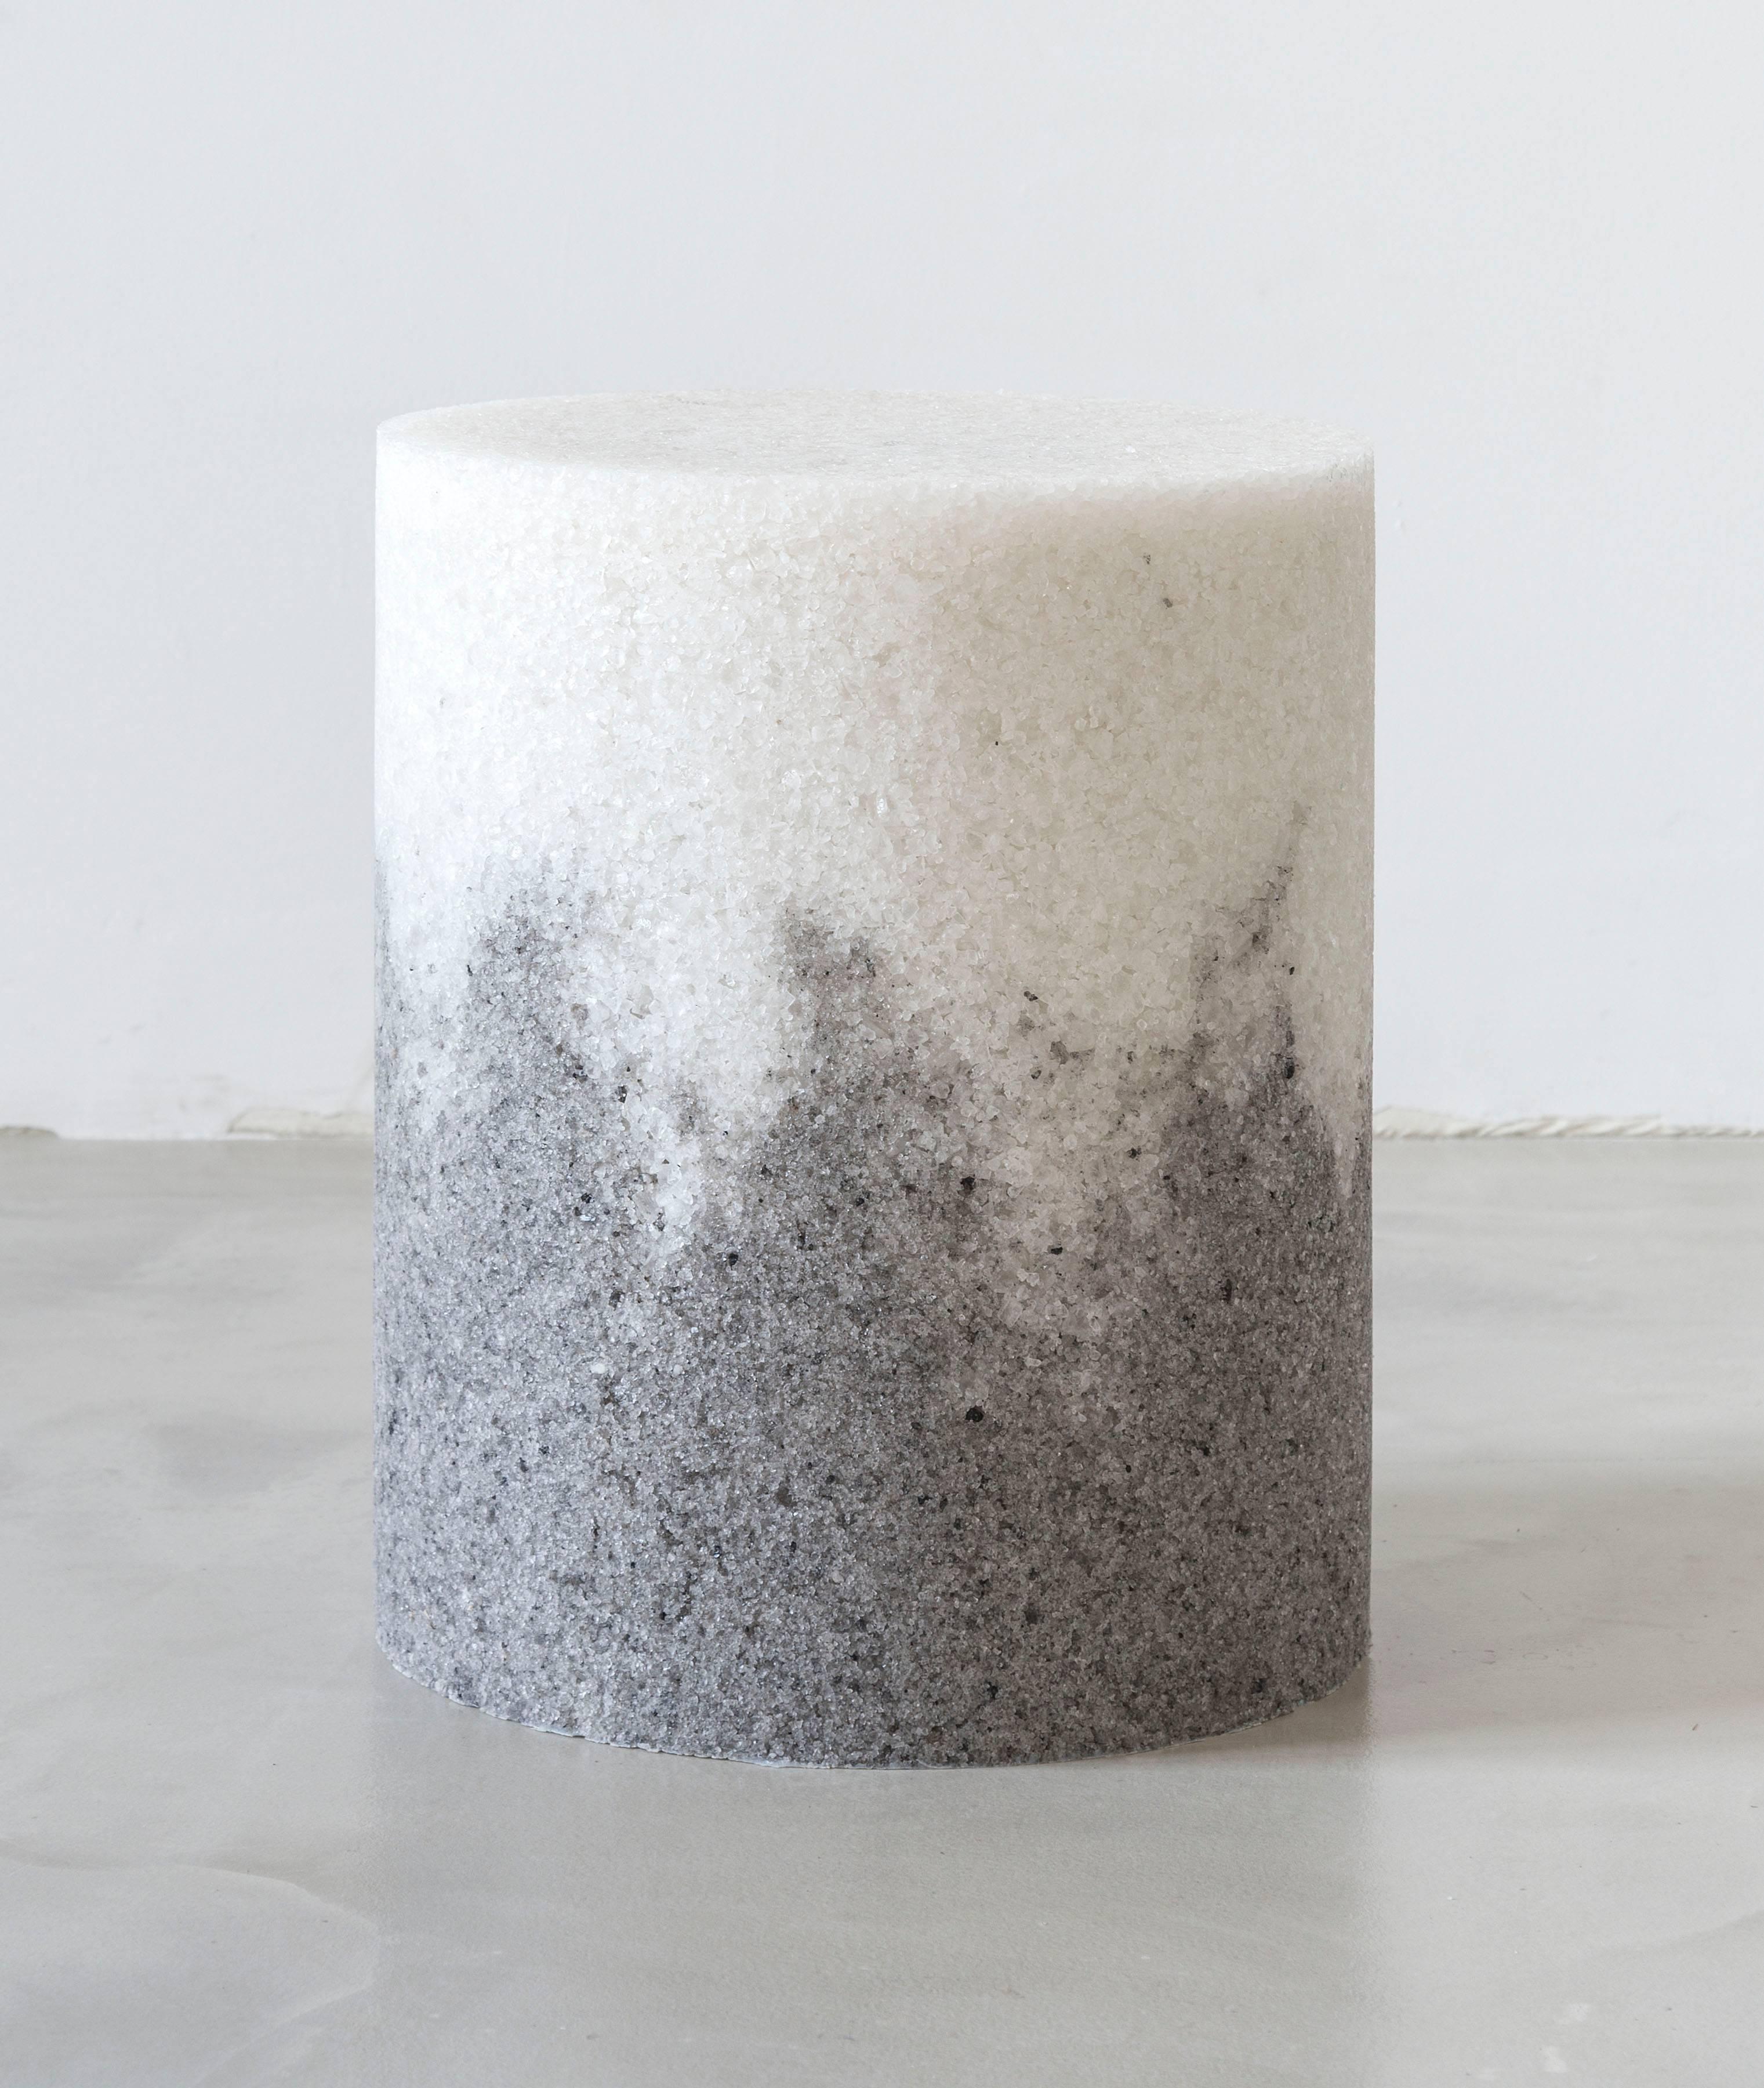 Composed from crushed clear and grey glass , the made-to-order drum has a hollow cavity and maintains an organic texture and sophisticated composition. The piece has a hollow cavity and weighs approximately 40 lbs.